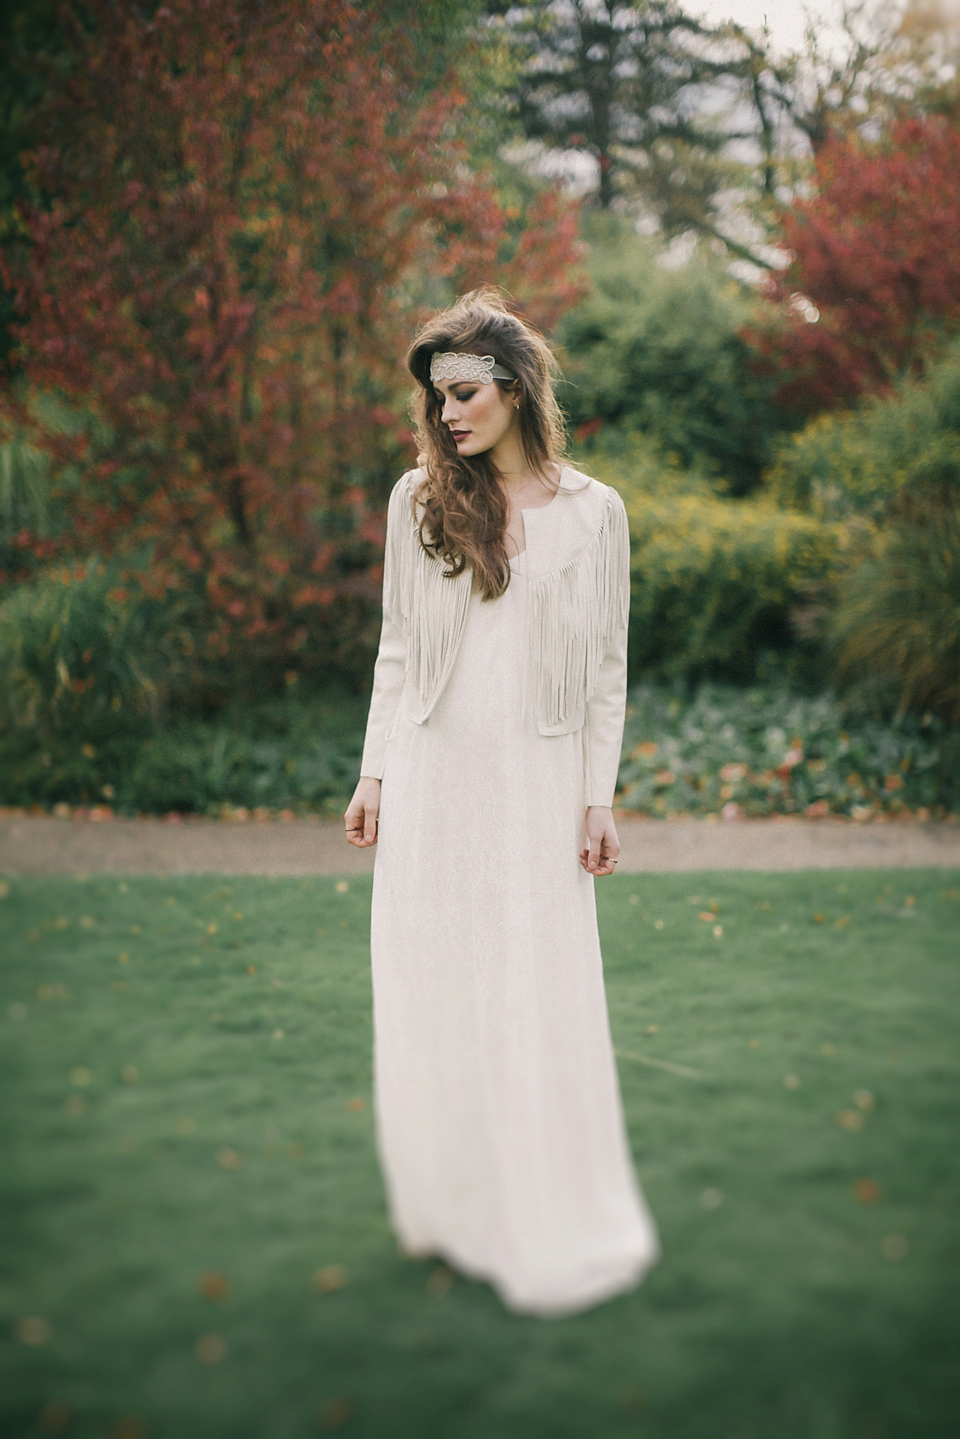 Beautiful 70's inspiration for the stylish modern bride. Styling by Cicily bridal using Halfpenny London and Charlie Brear gowns. Accessories by Debbie Carlisle. Photography by Jess Petrie.